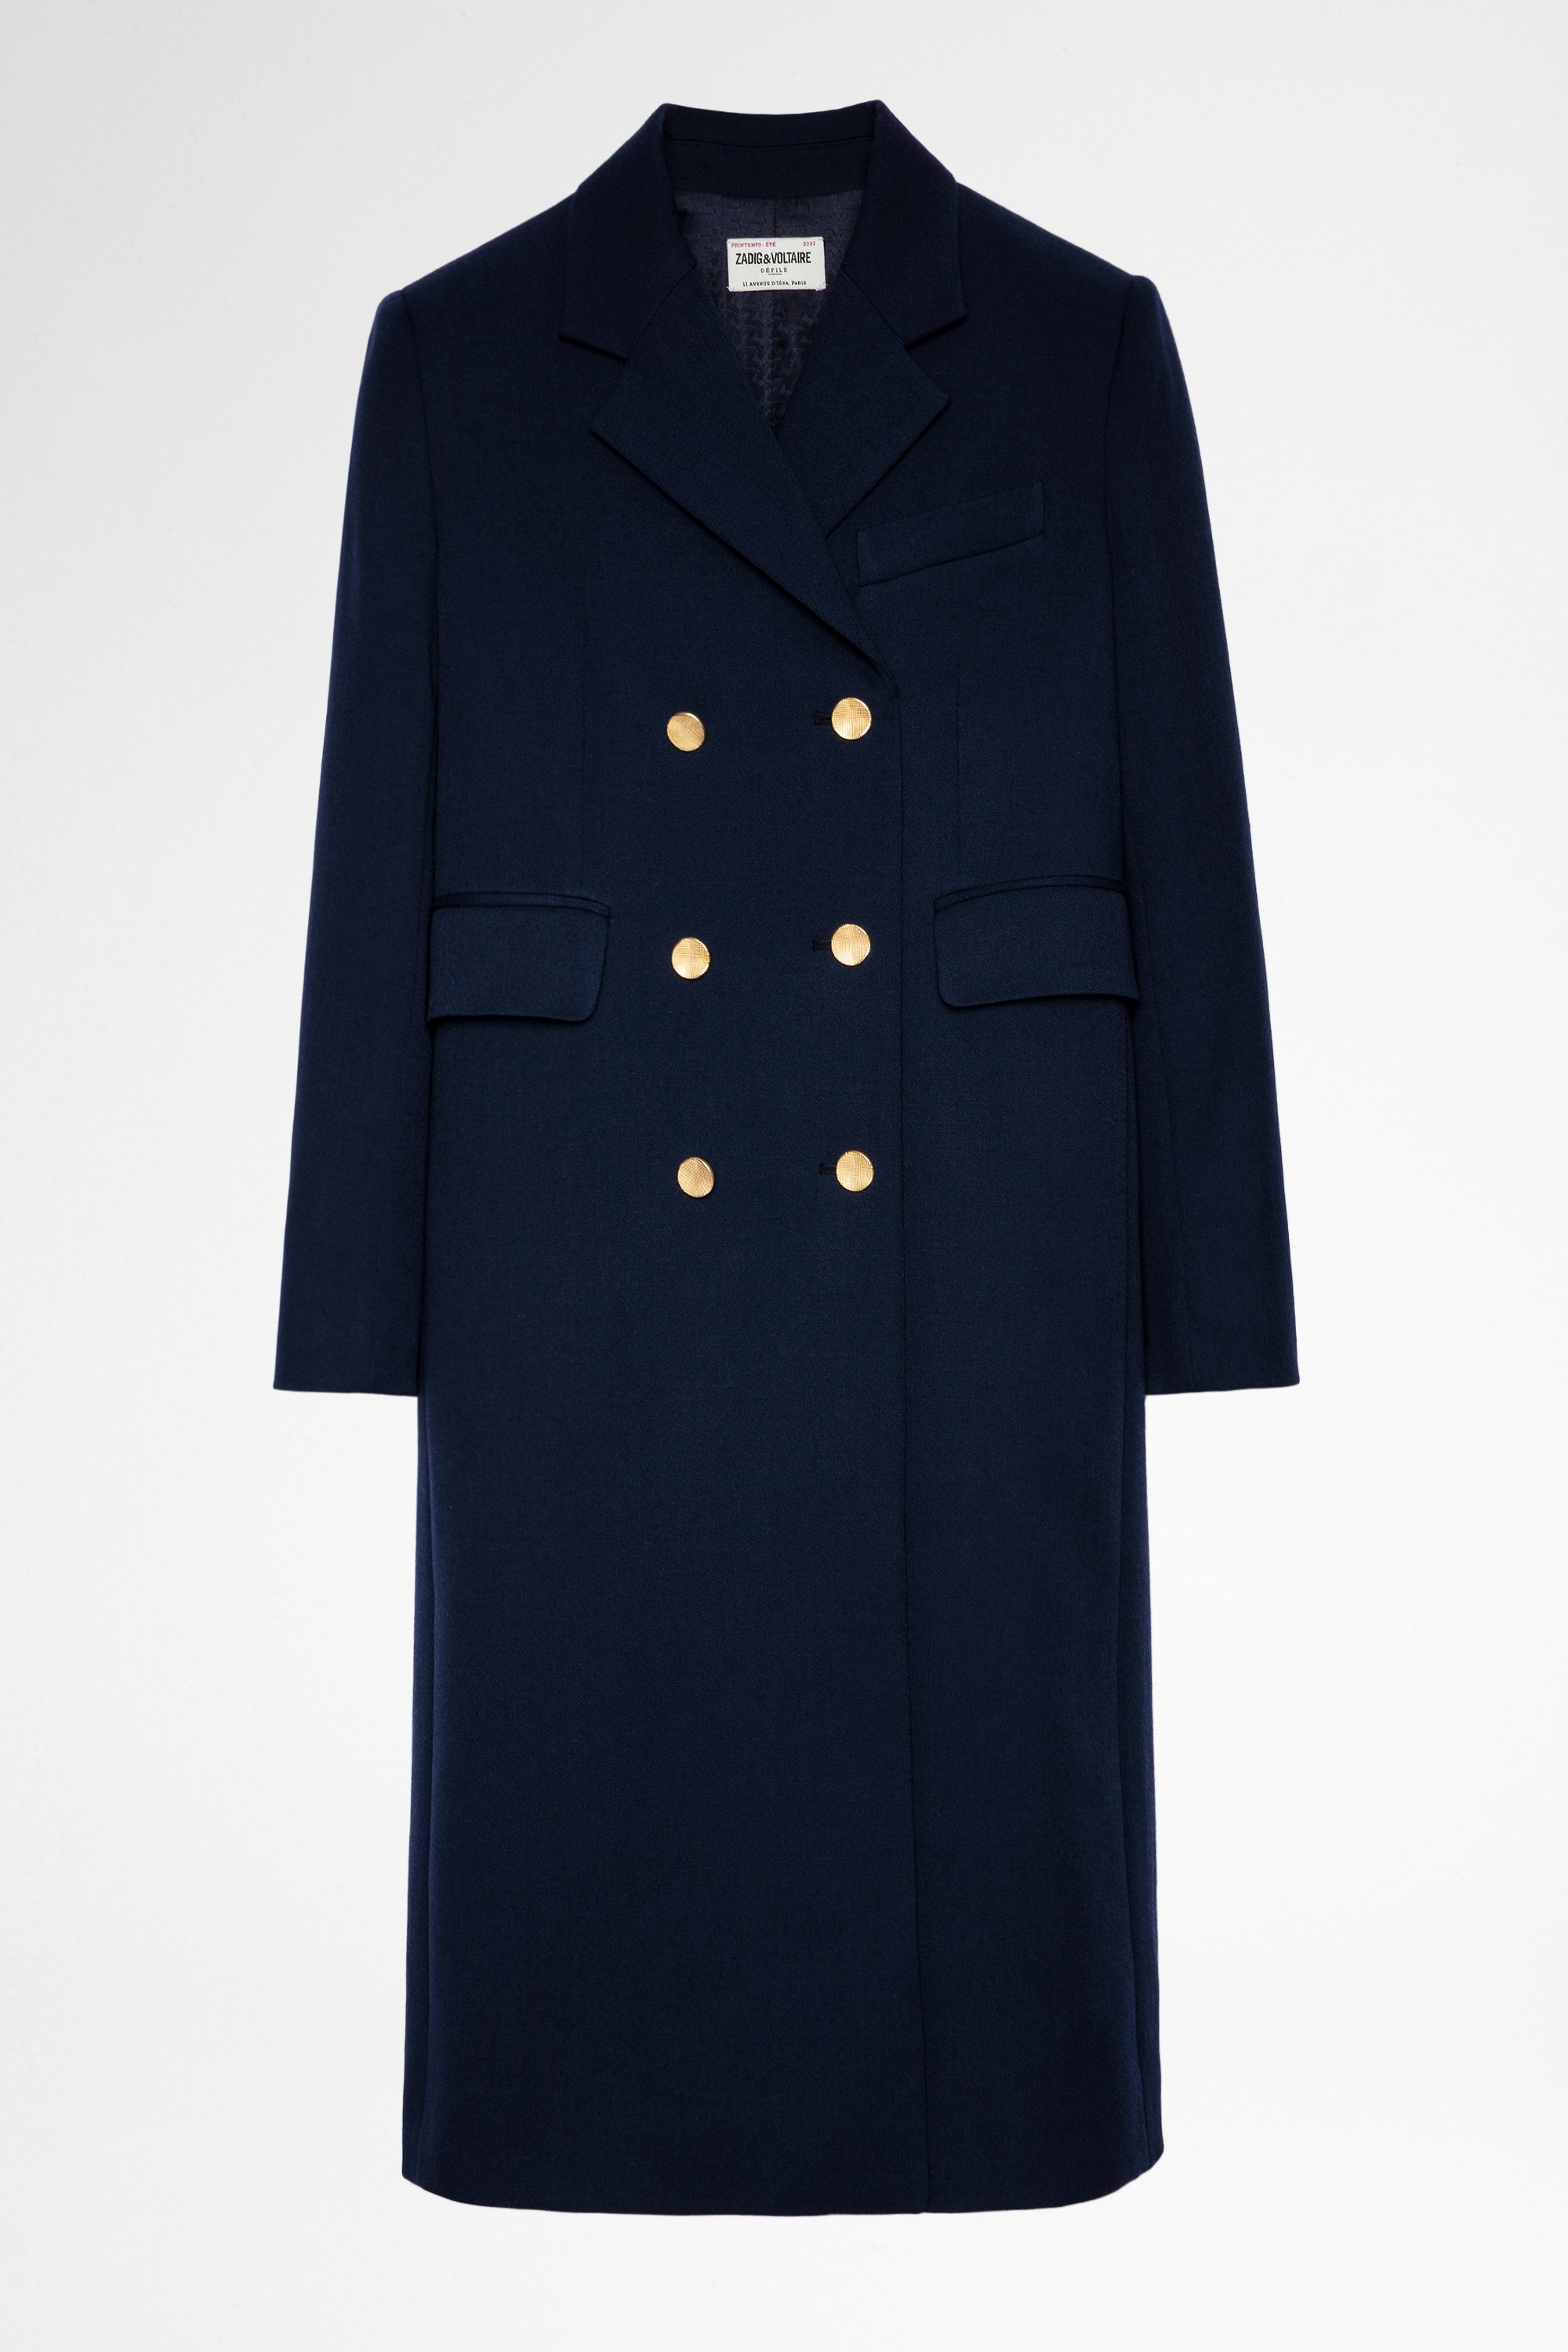 Maestro Coat Women's navy blue military coat with gold buttons